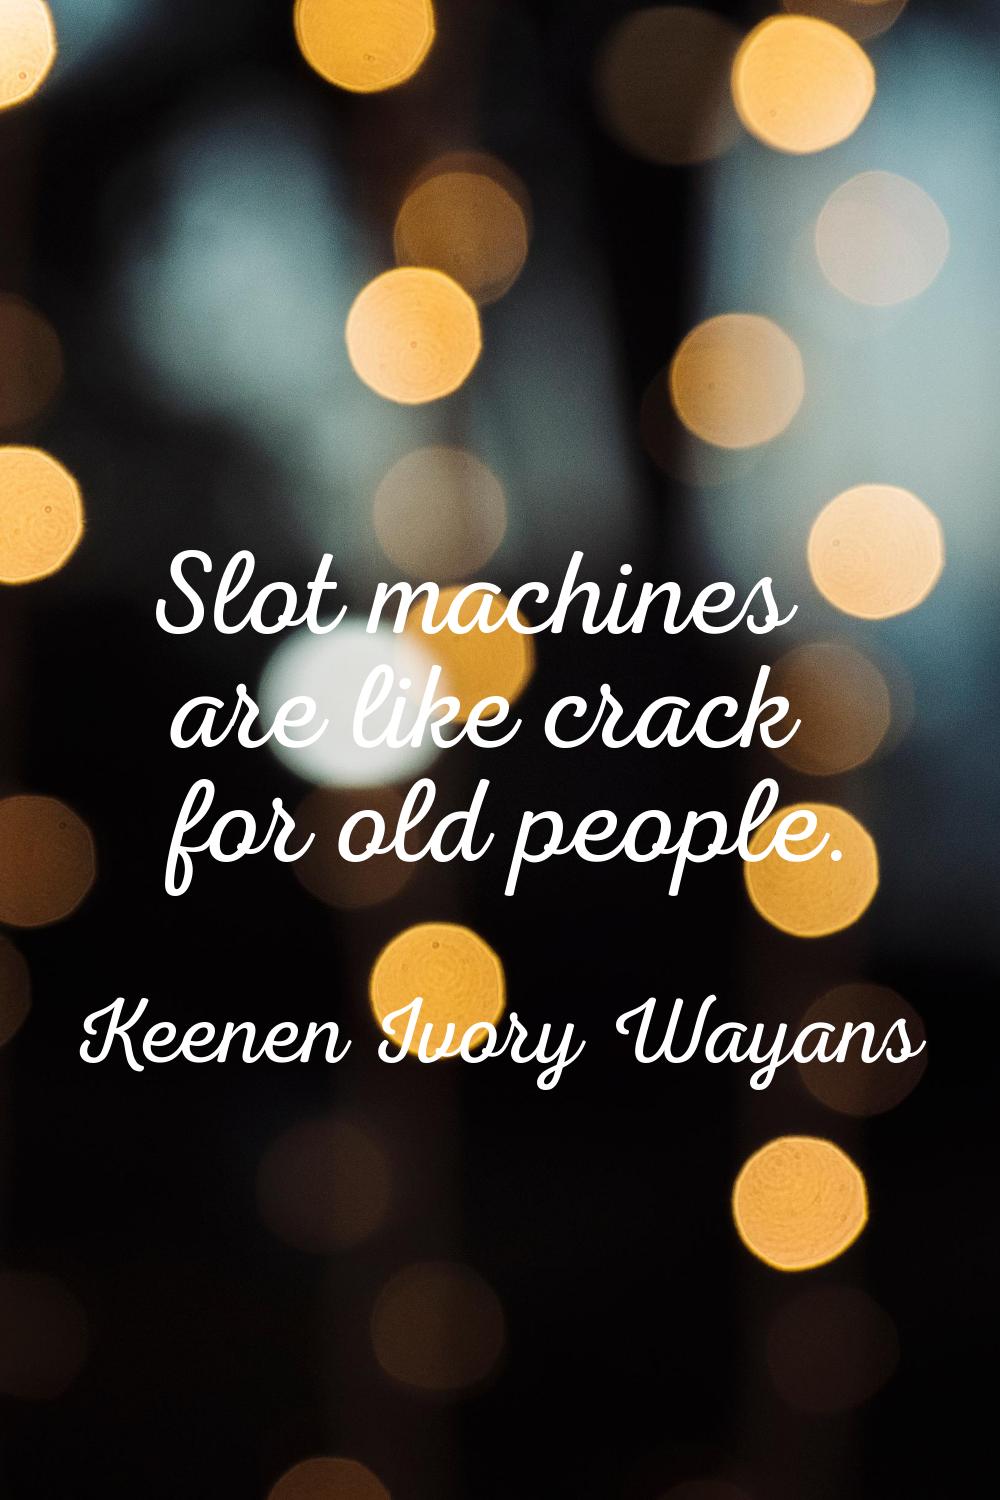 Slot machines are like crack for old people.